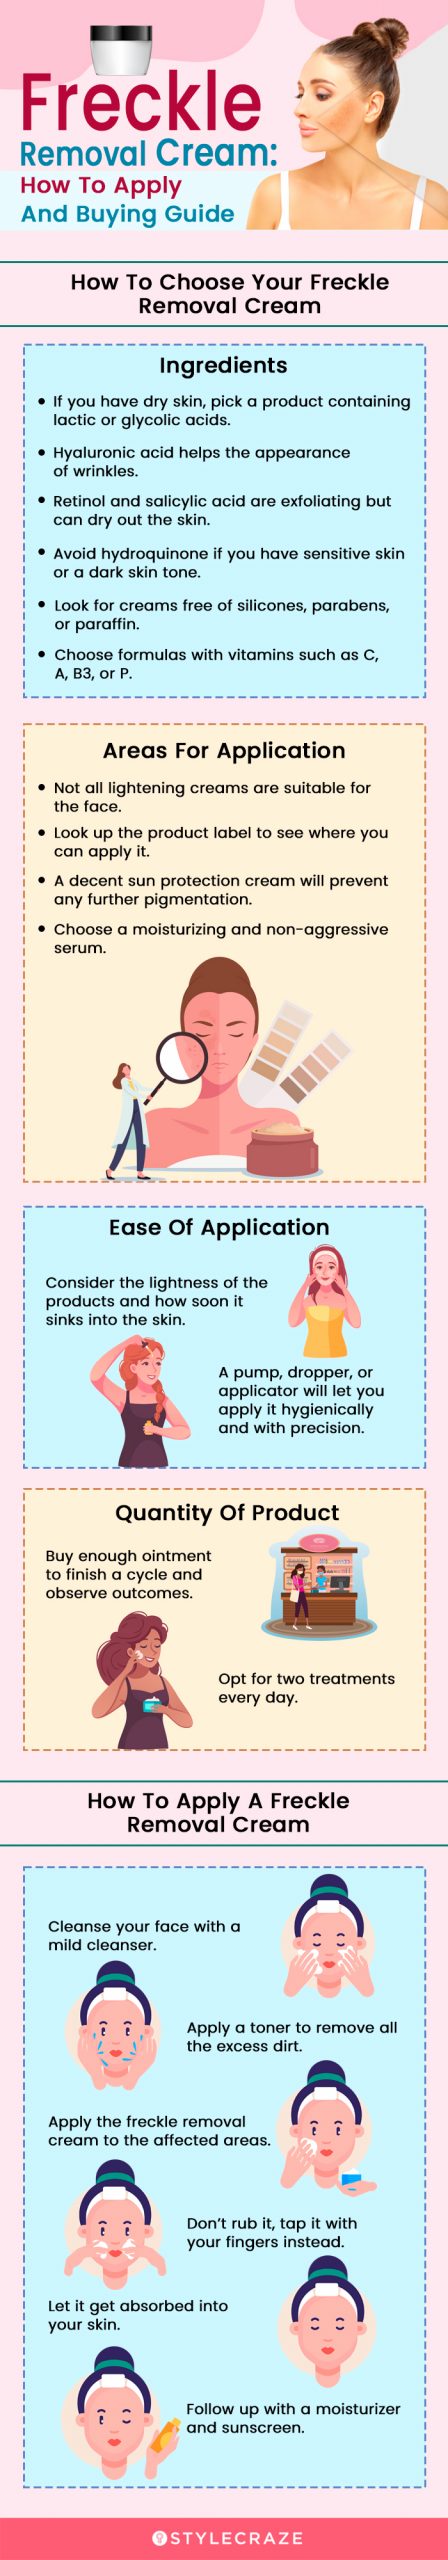 Freckle Removal Cream [infographic]